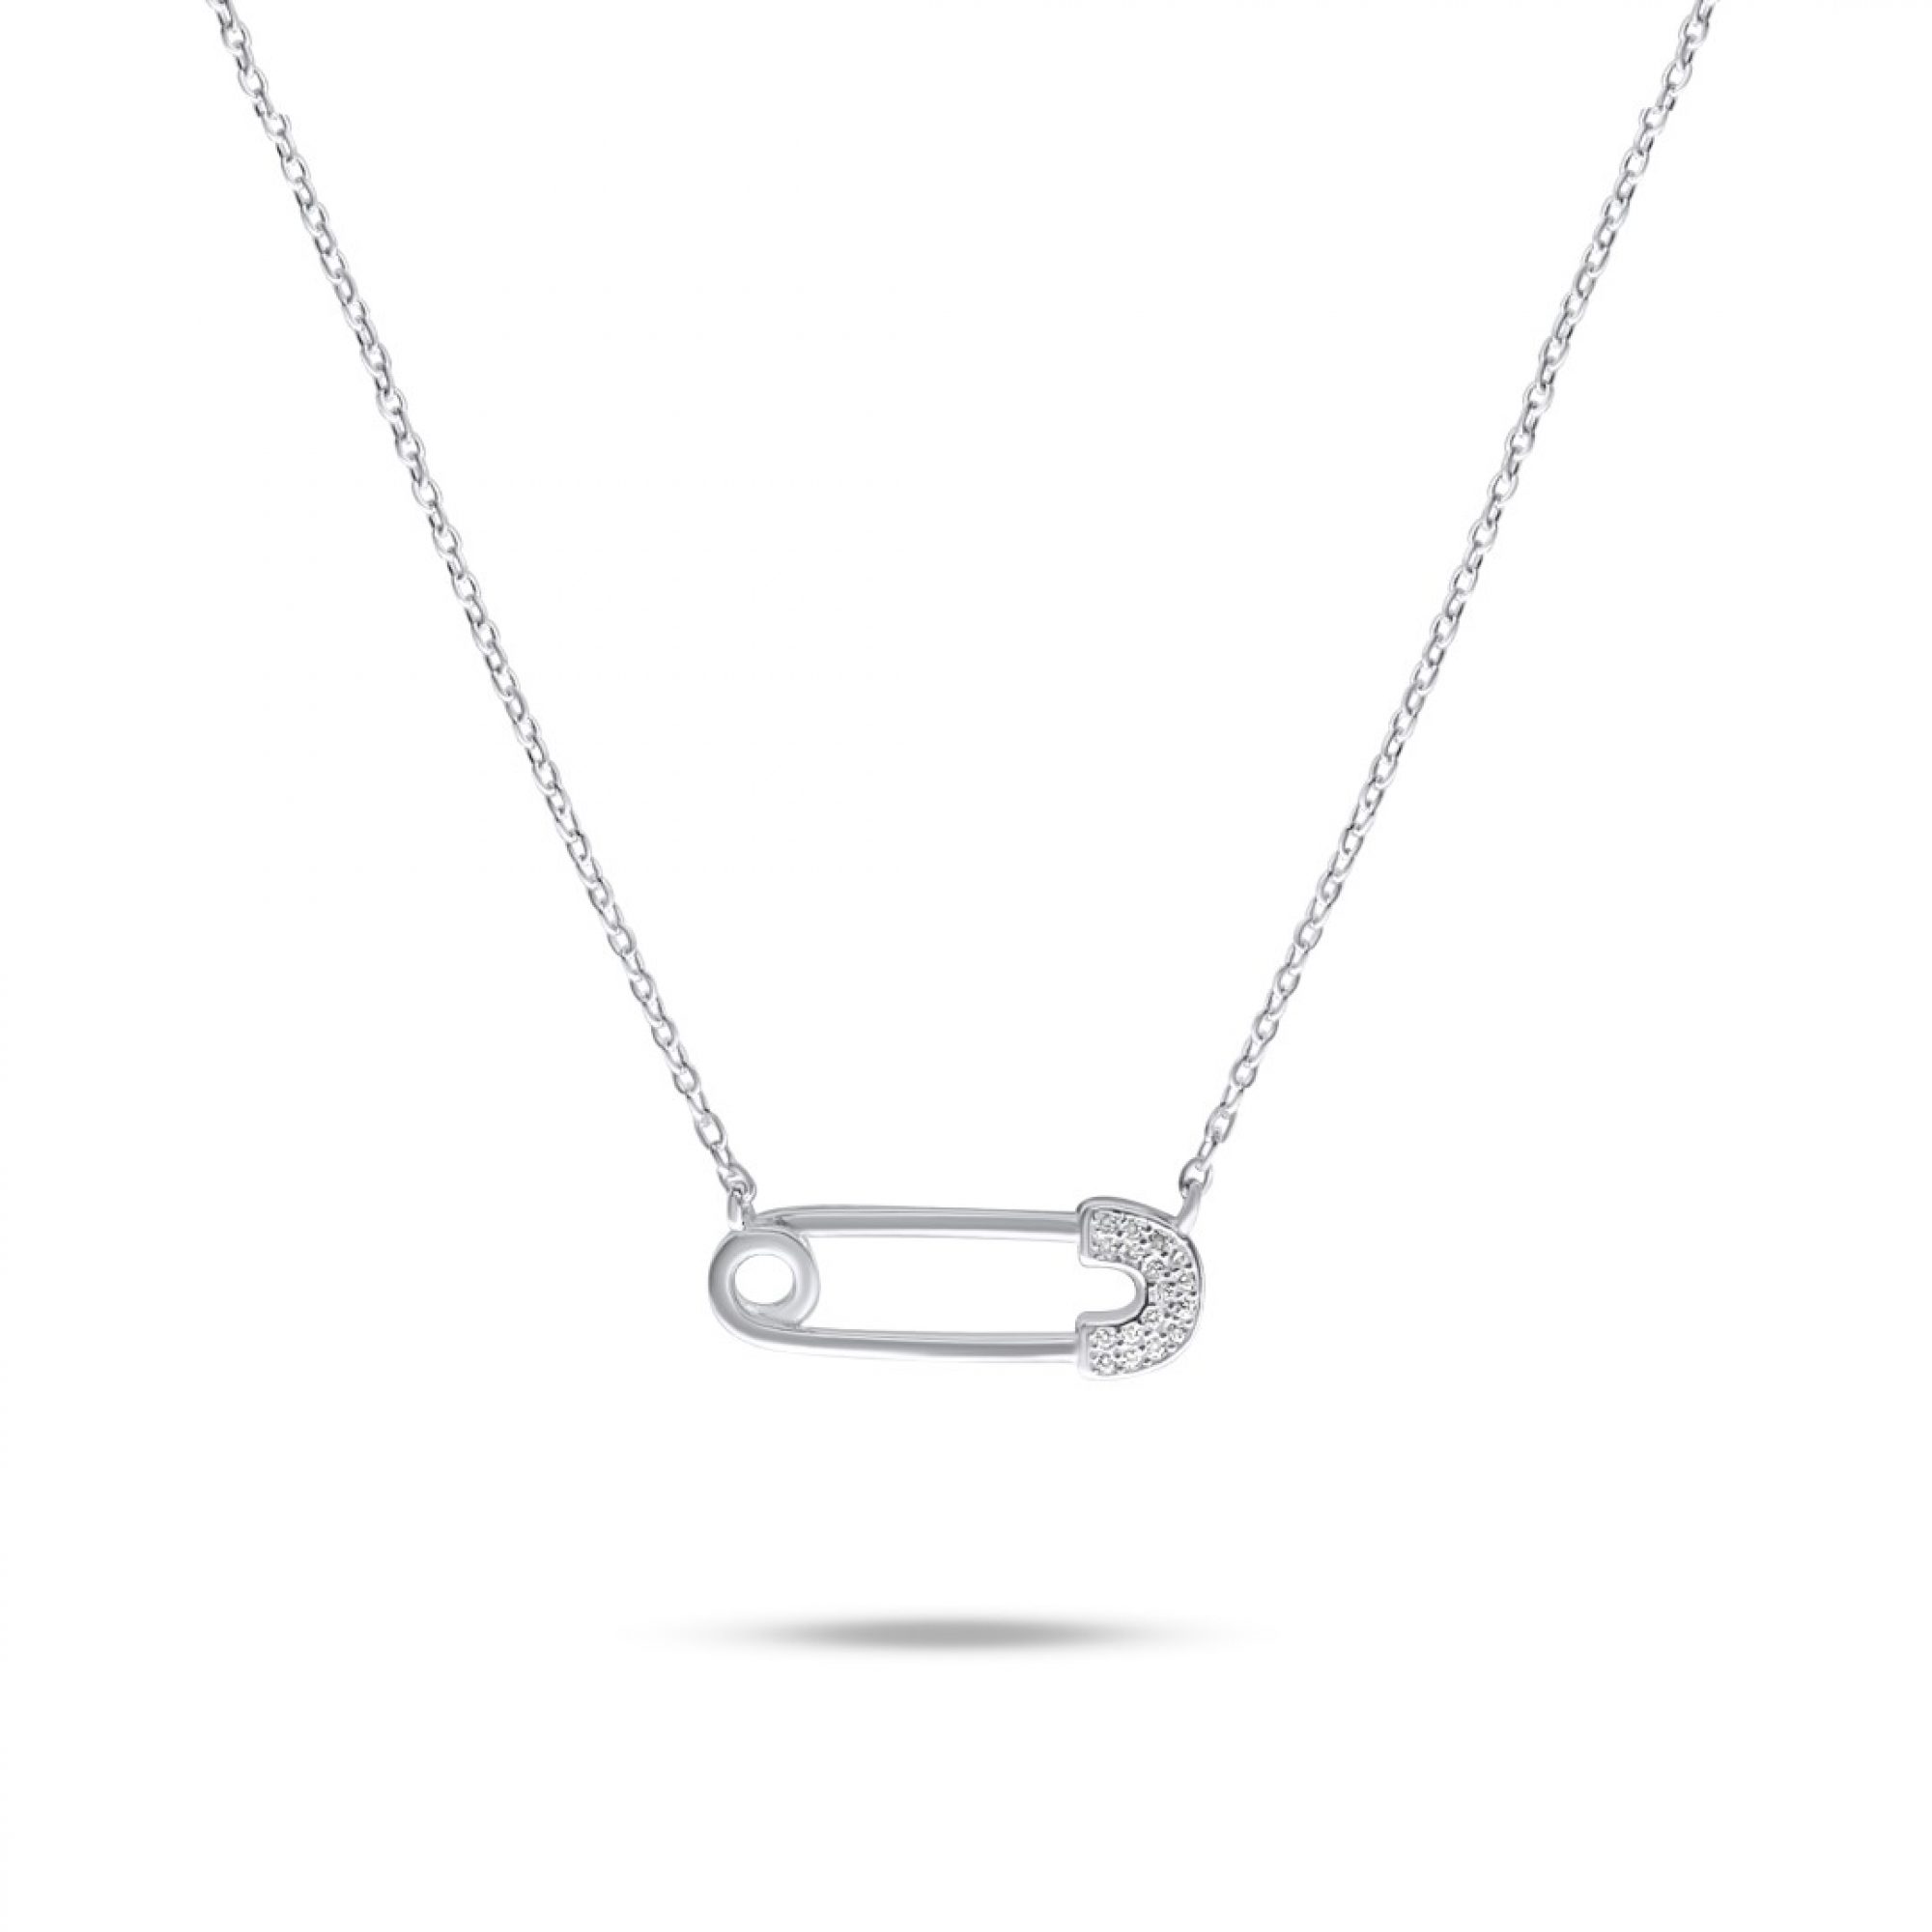 Safety pin necklace with zircon stones